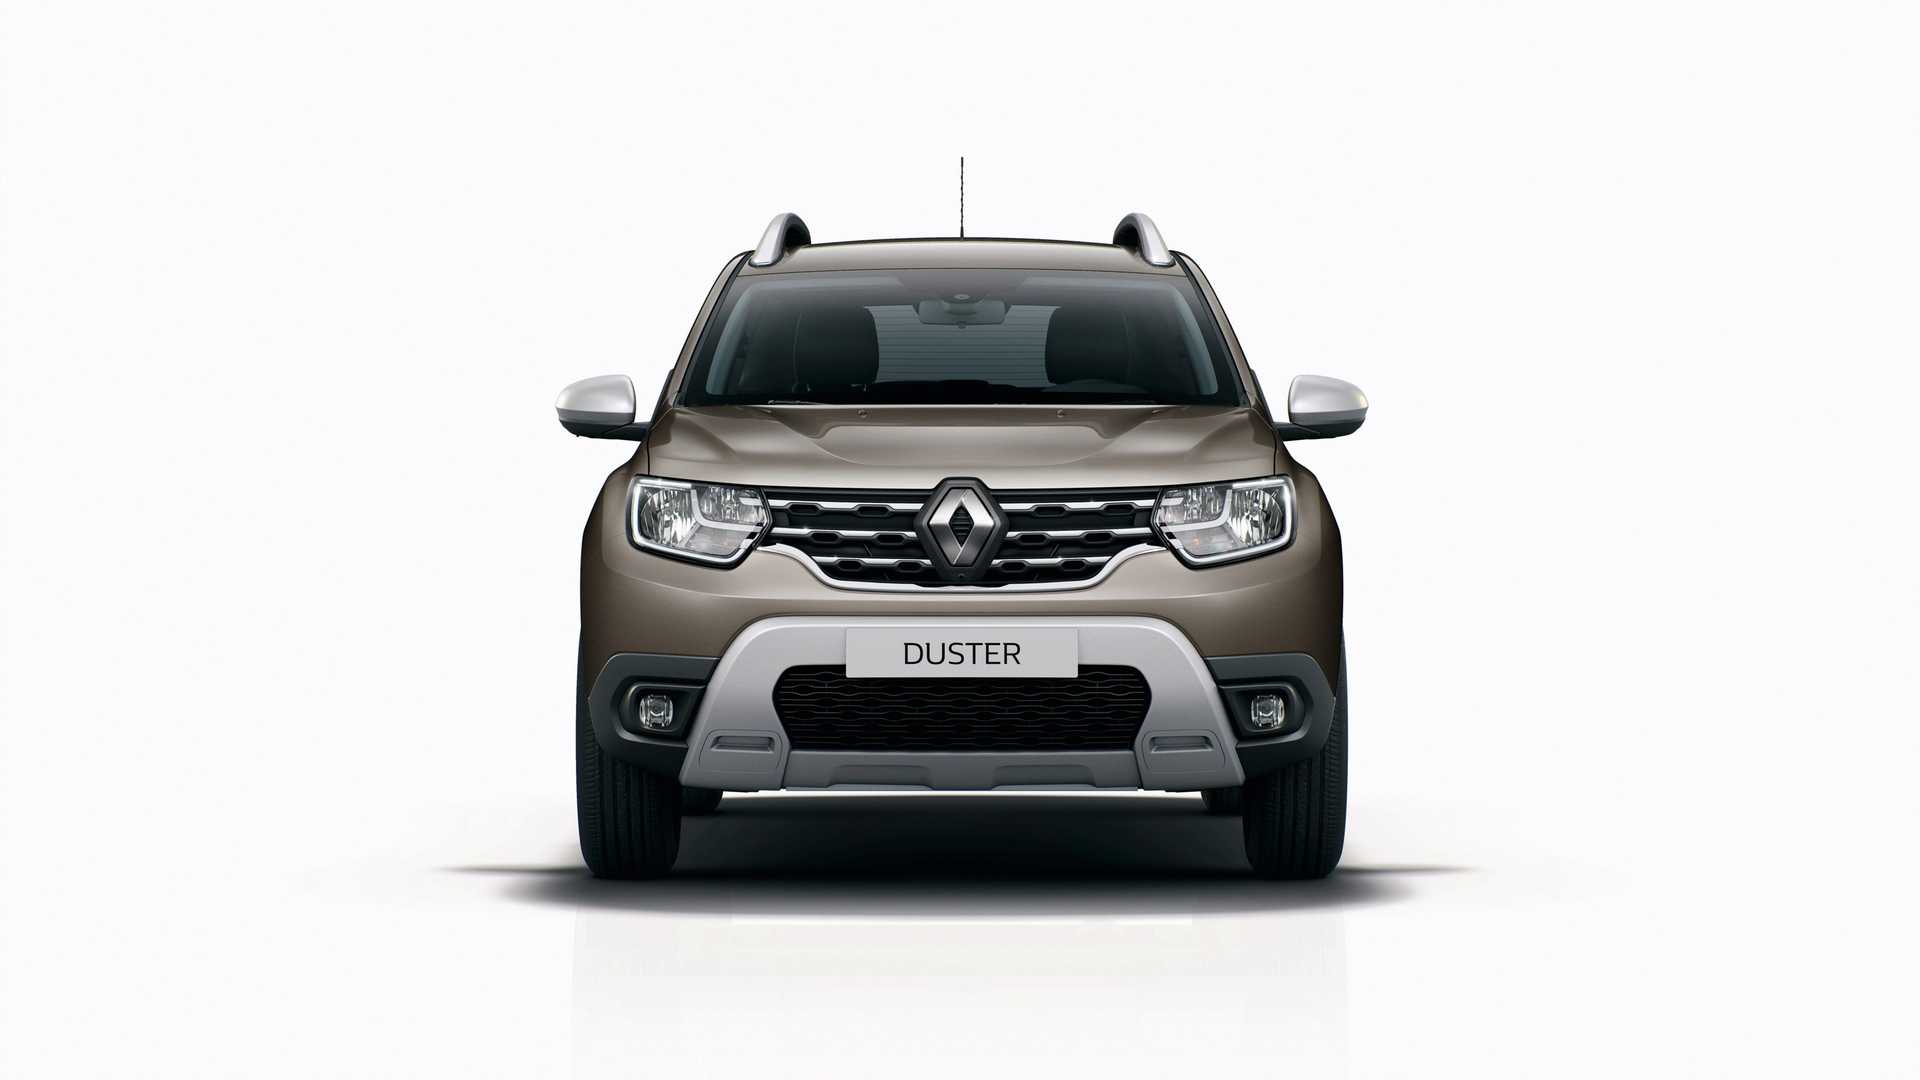 High Quality Tuning Files Renault Duster 1.5 DCI 109hp